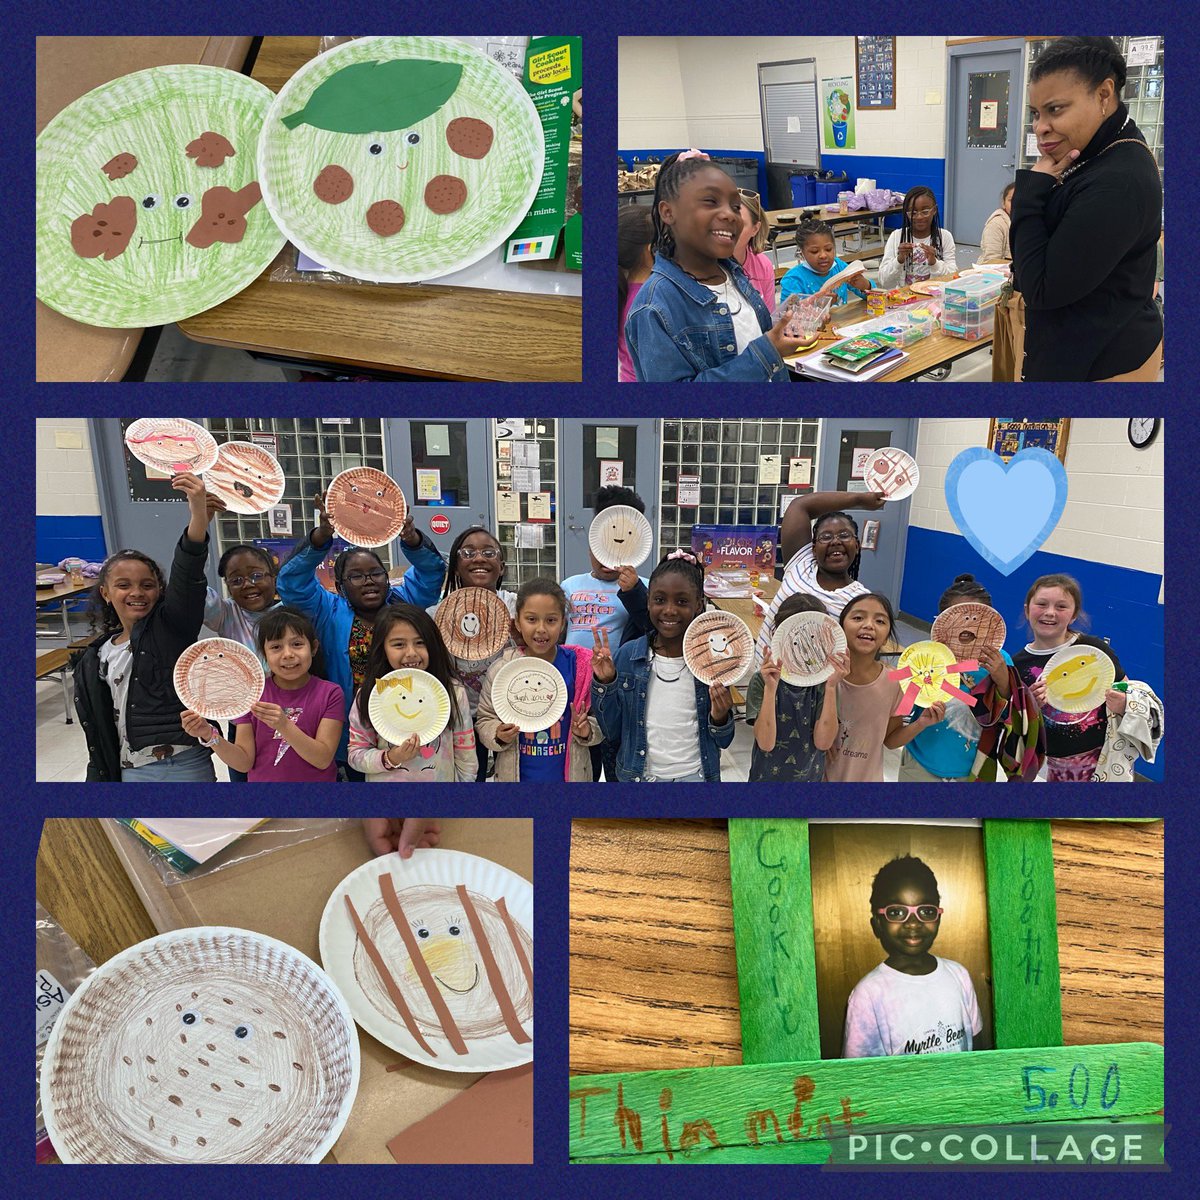 Our STEAM GS learned about financial literacy, marketing and PR in preparation for their Motown Throwdown Cookie Booth! Enjoy the show and treats! @HillandalePOWER @DPSCoach @AKAFerrell_EdD